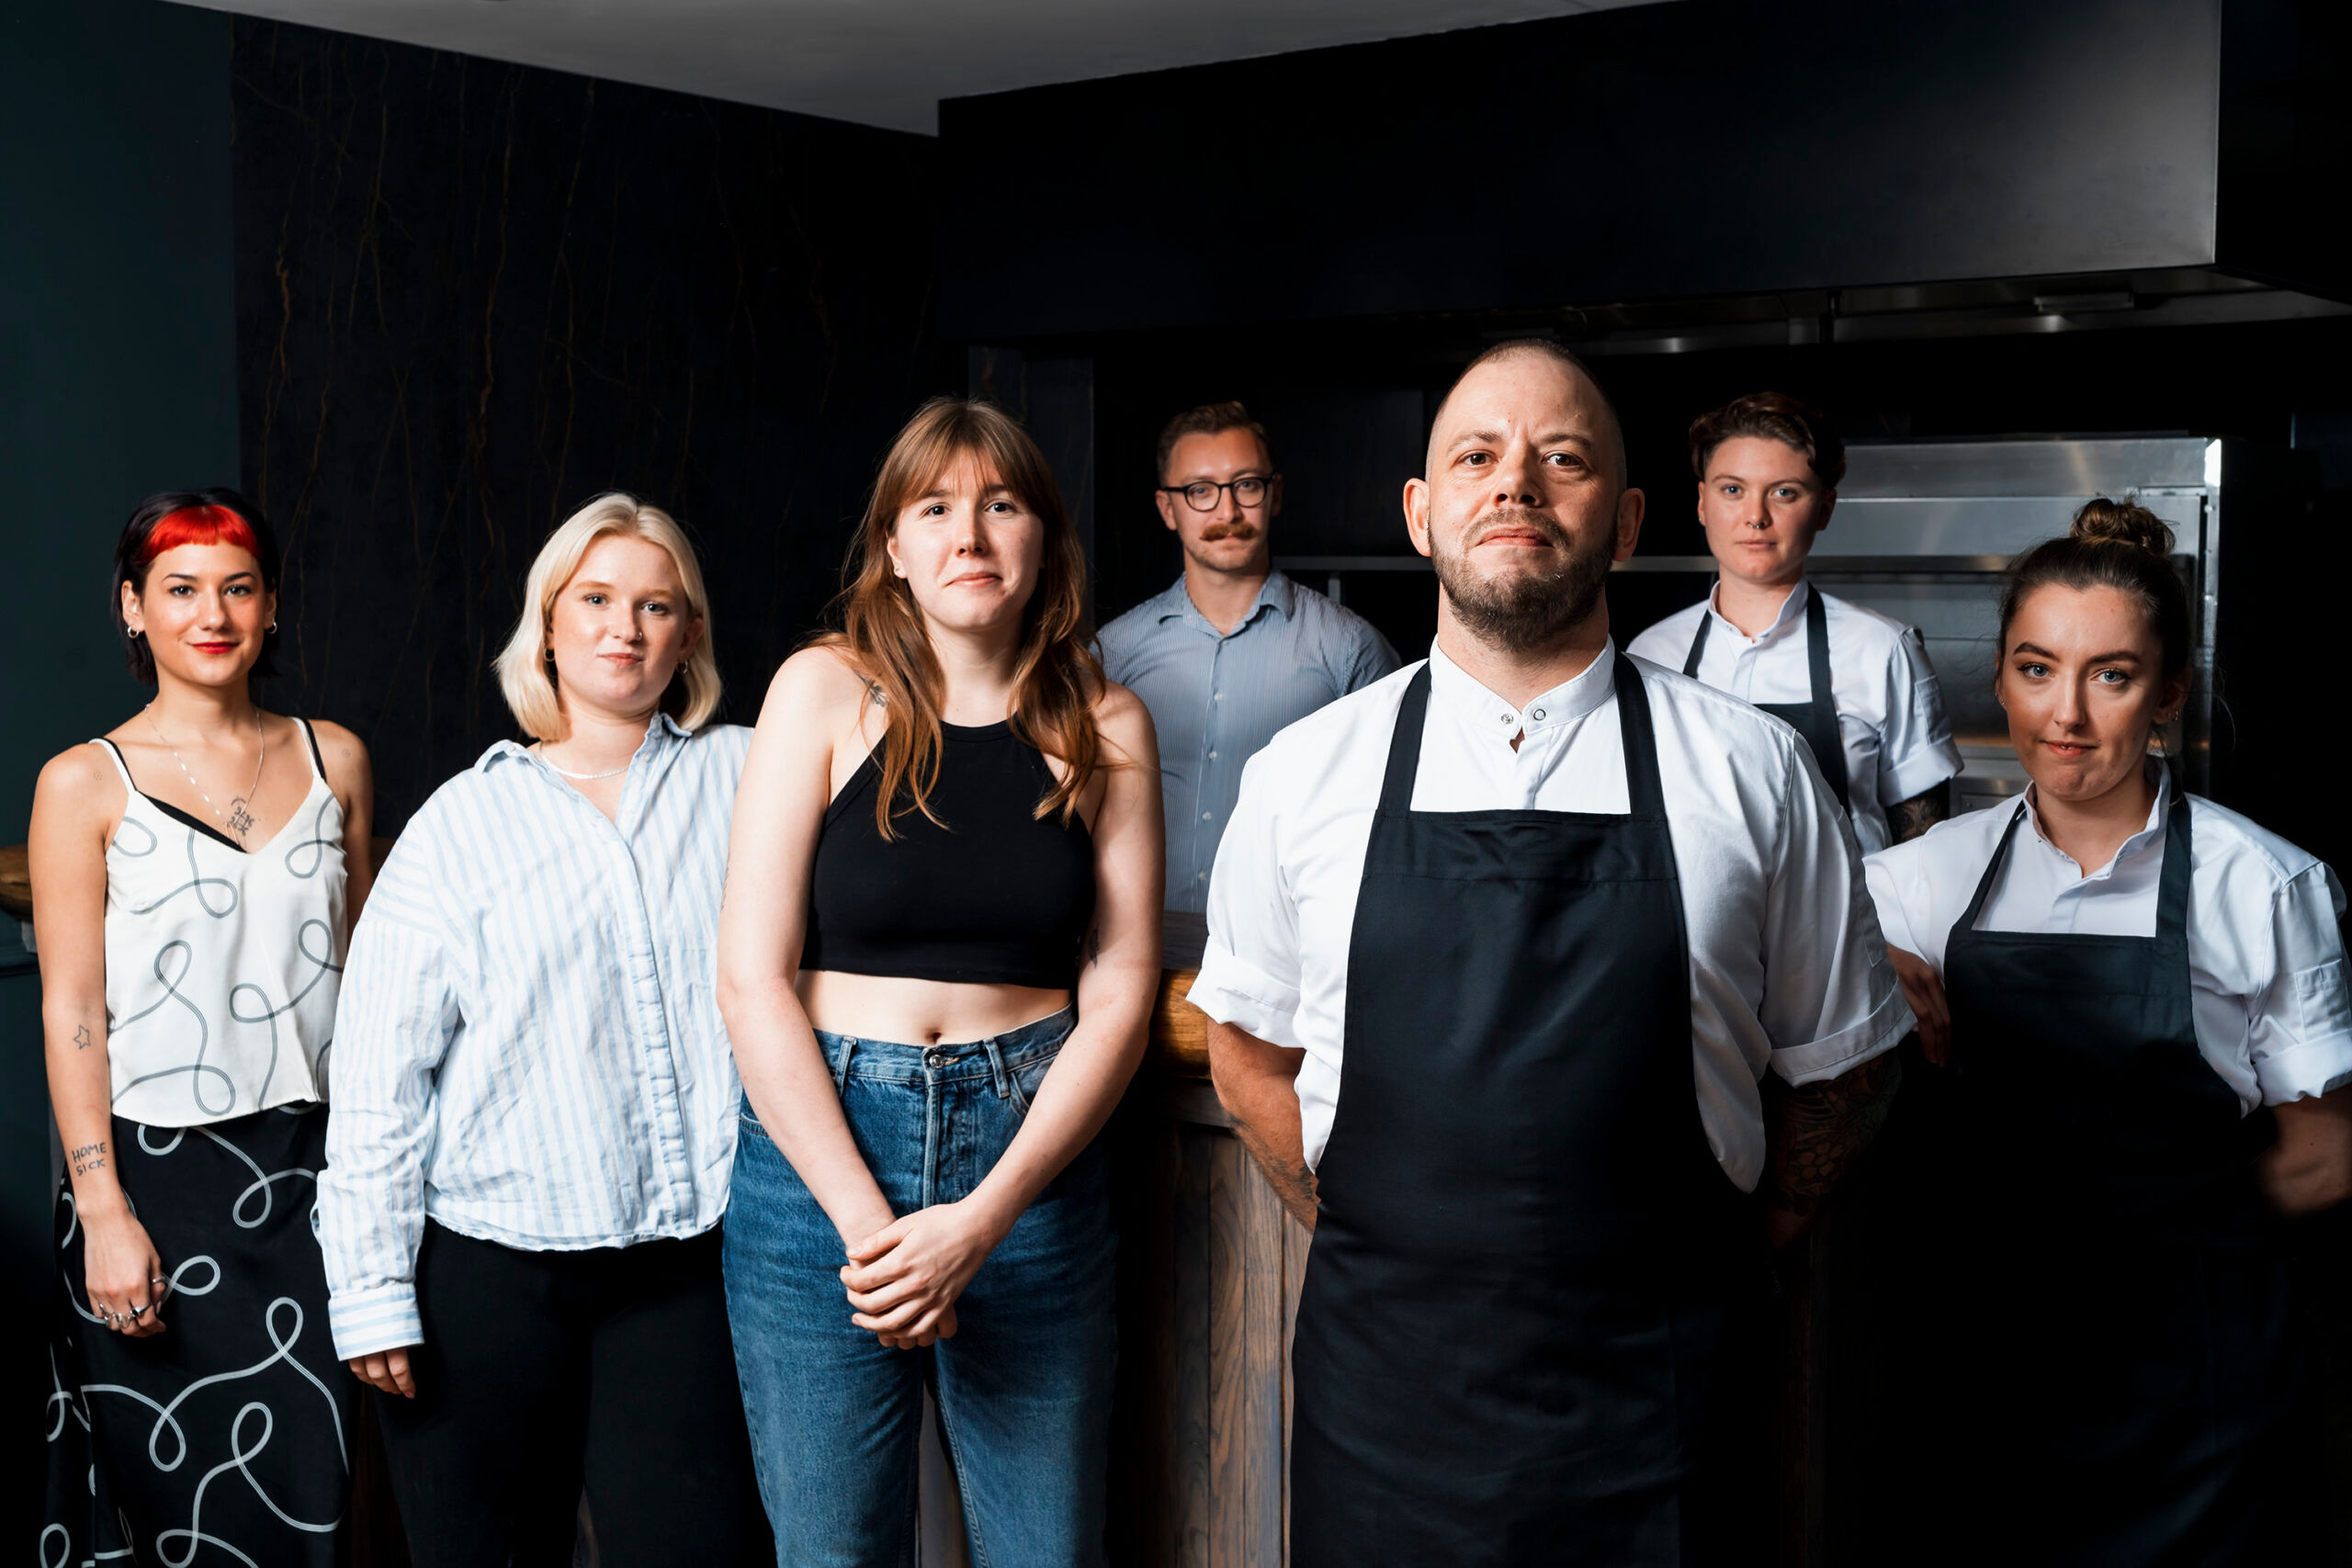 The new team at Furna, a group of seven people stand in a darkened room, at the front is a bald man in chef whites and a navy apron, to his left a female chef dressed the same